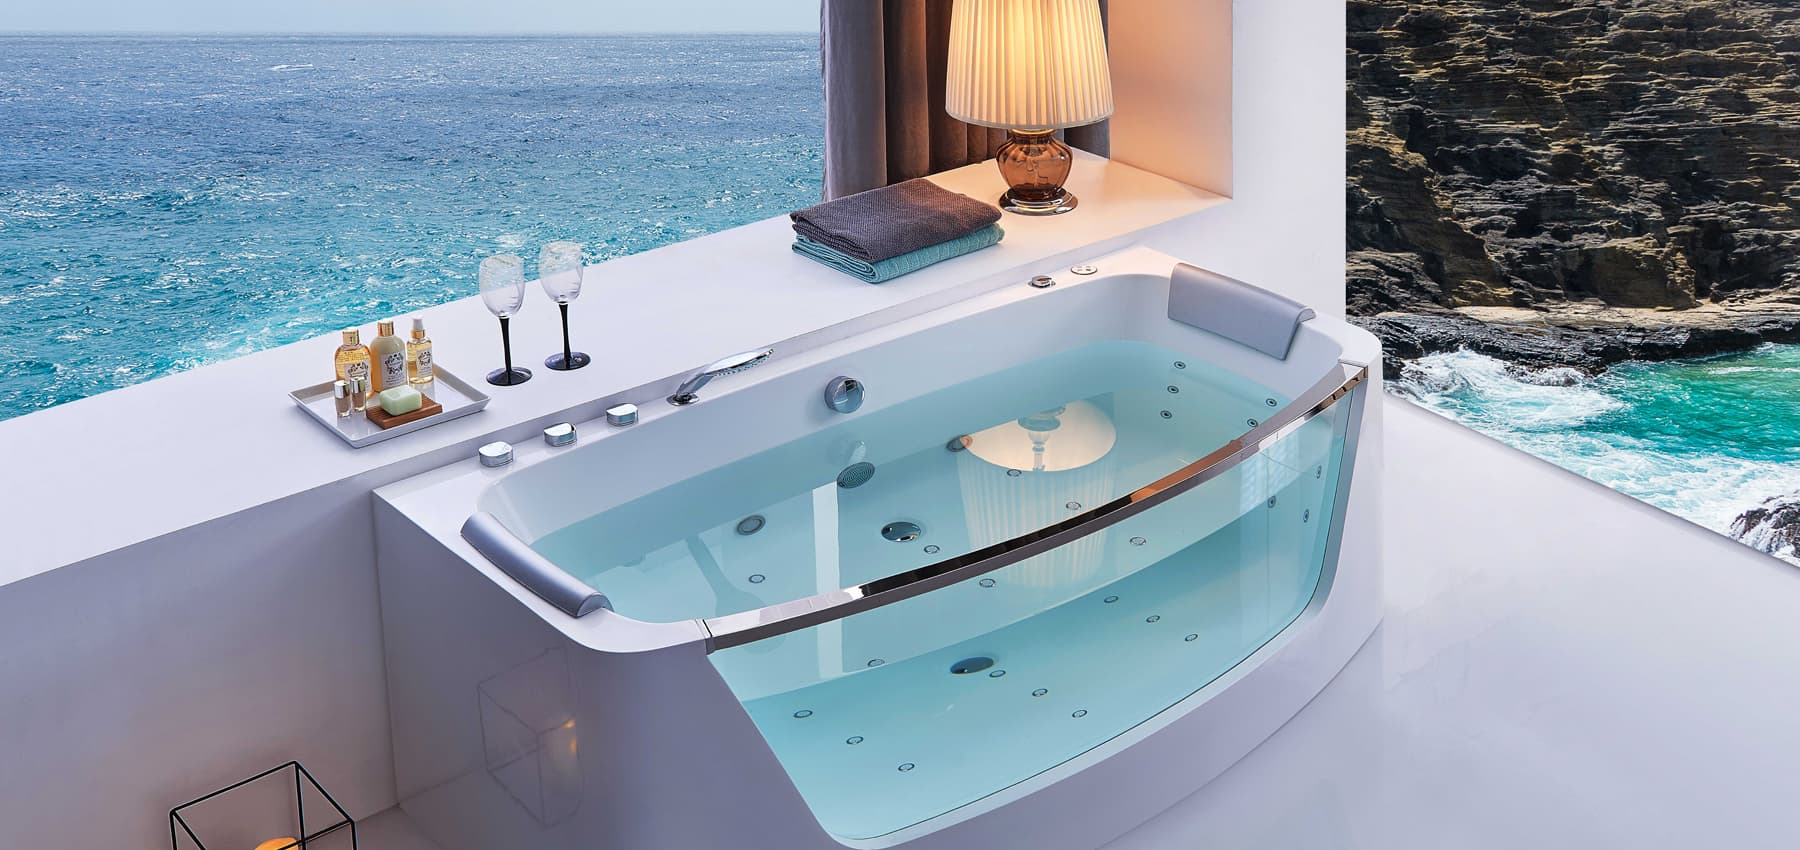 Luxury freestanding jetted bathtubs, Home spa experience